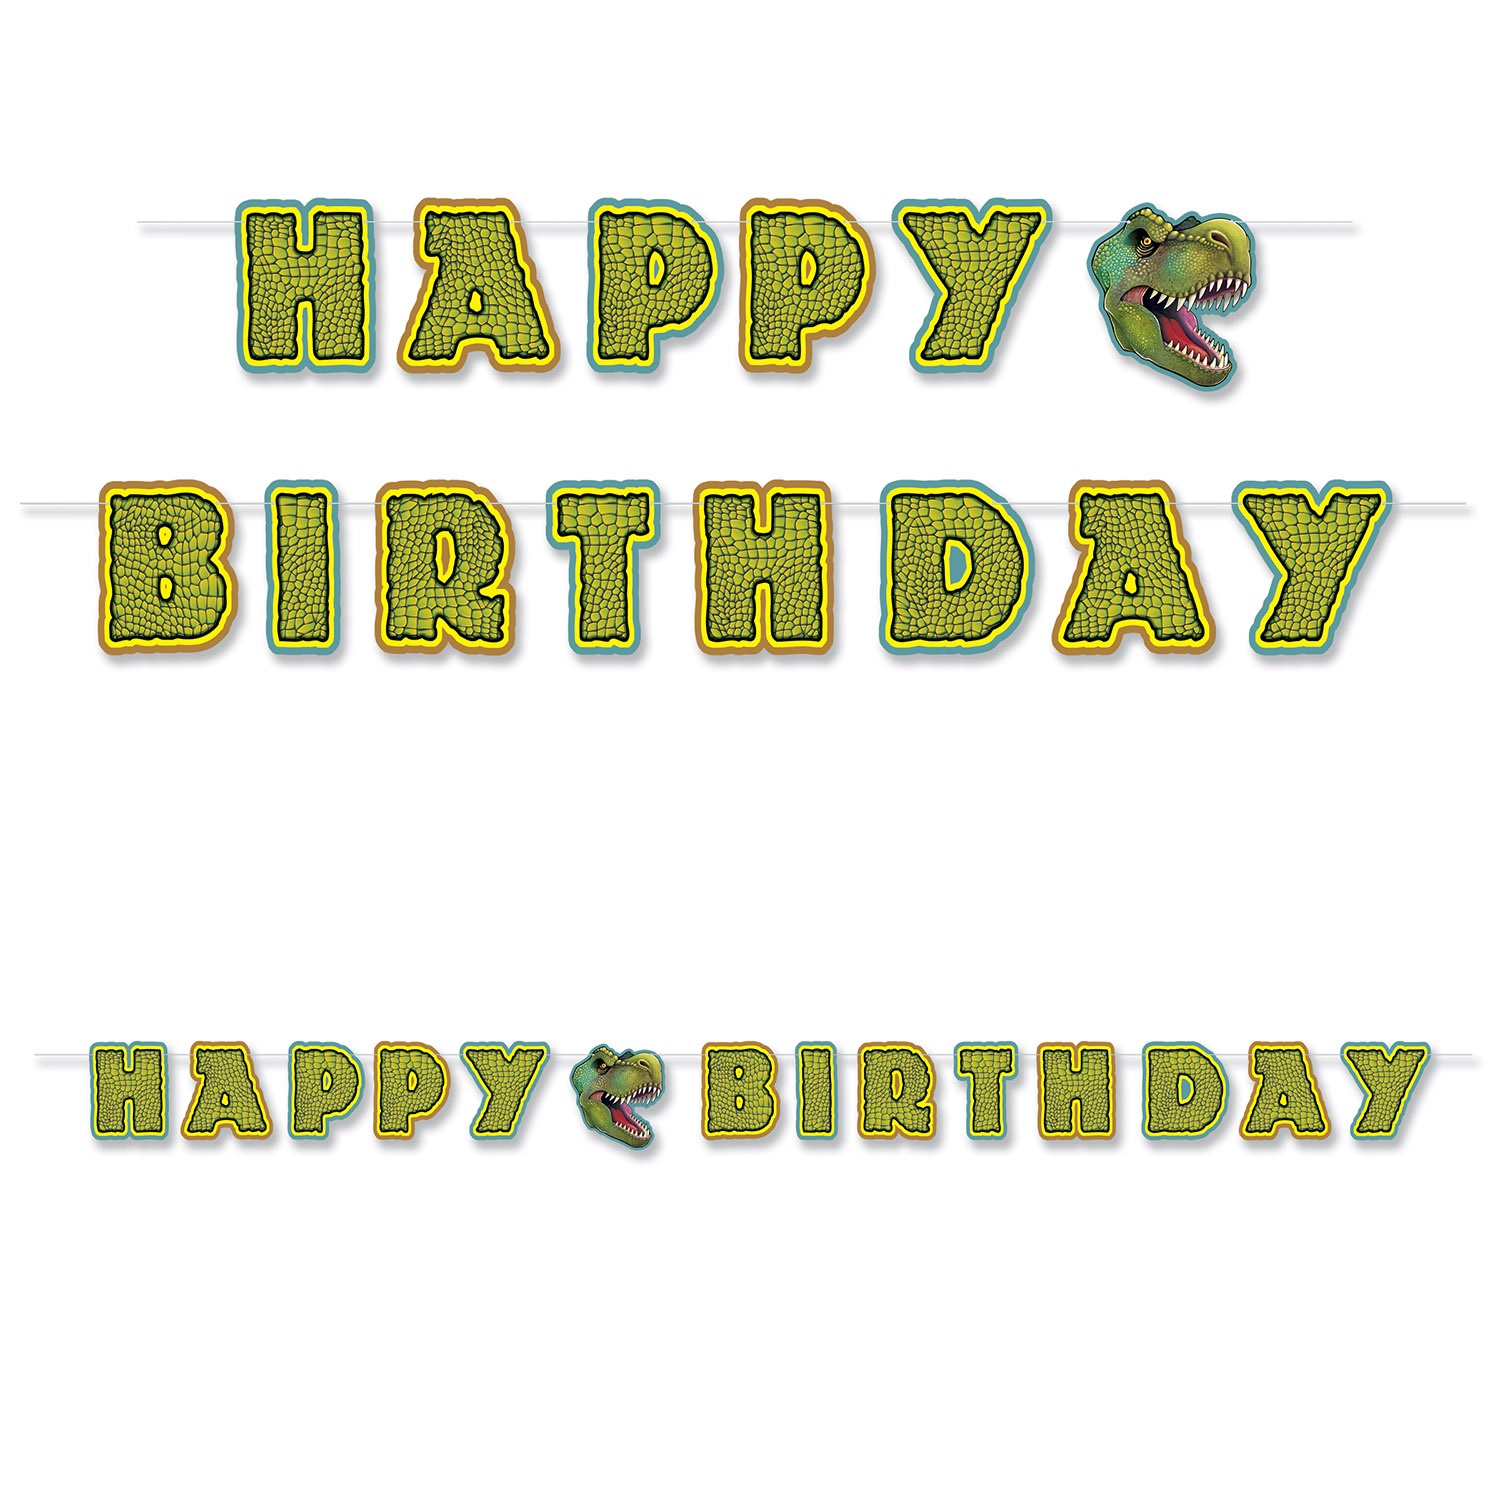 Party Central Club Pack of 12 Green Dinosaur 'Happy Birthday' Banners 10'